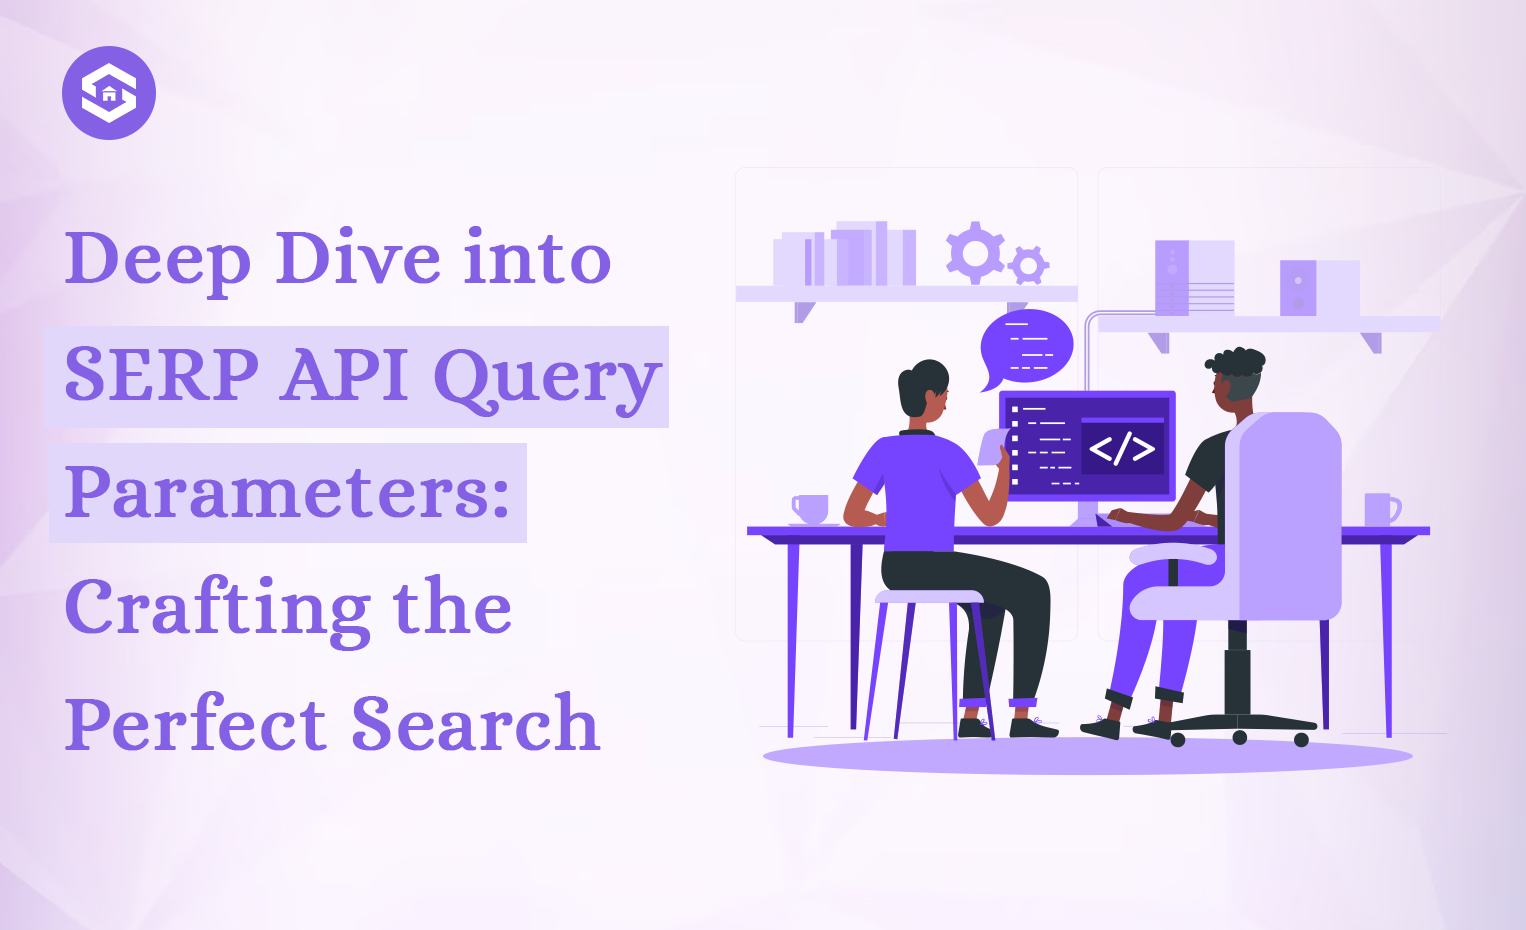 Get the Best Results: Making Your SERP API Queries Shine